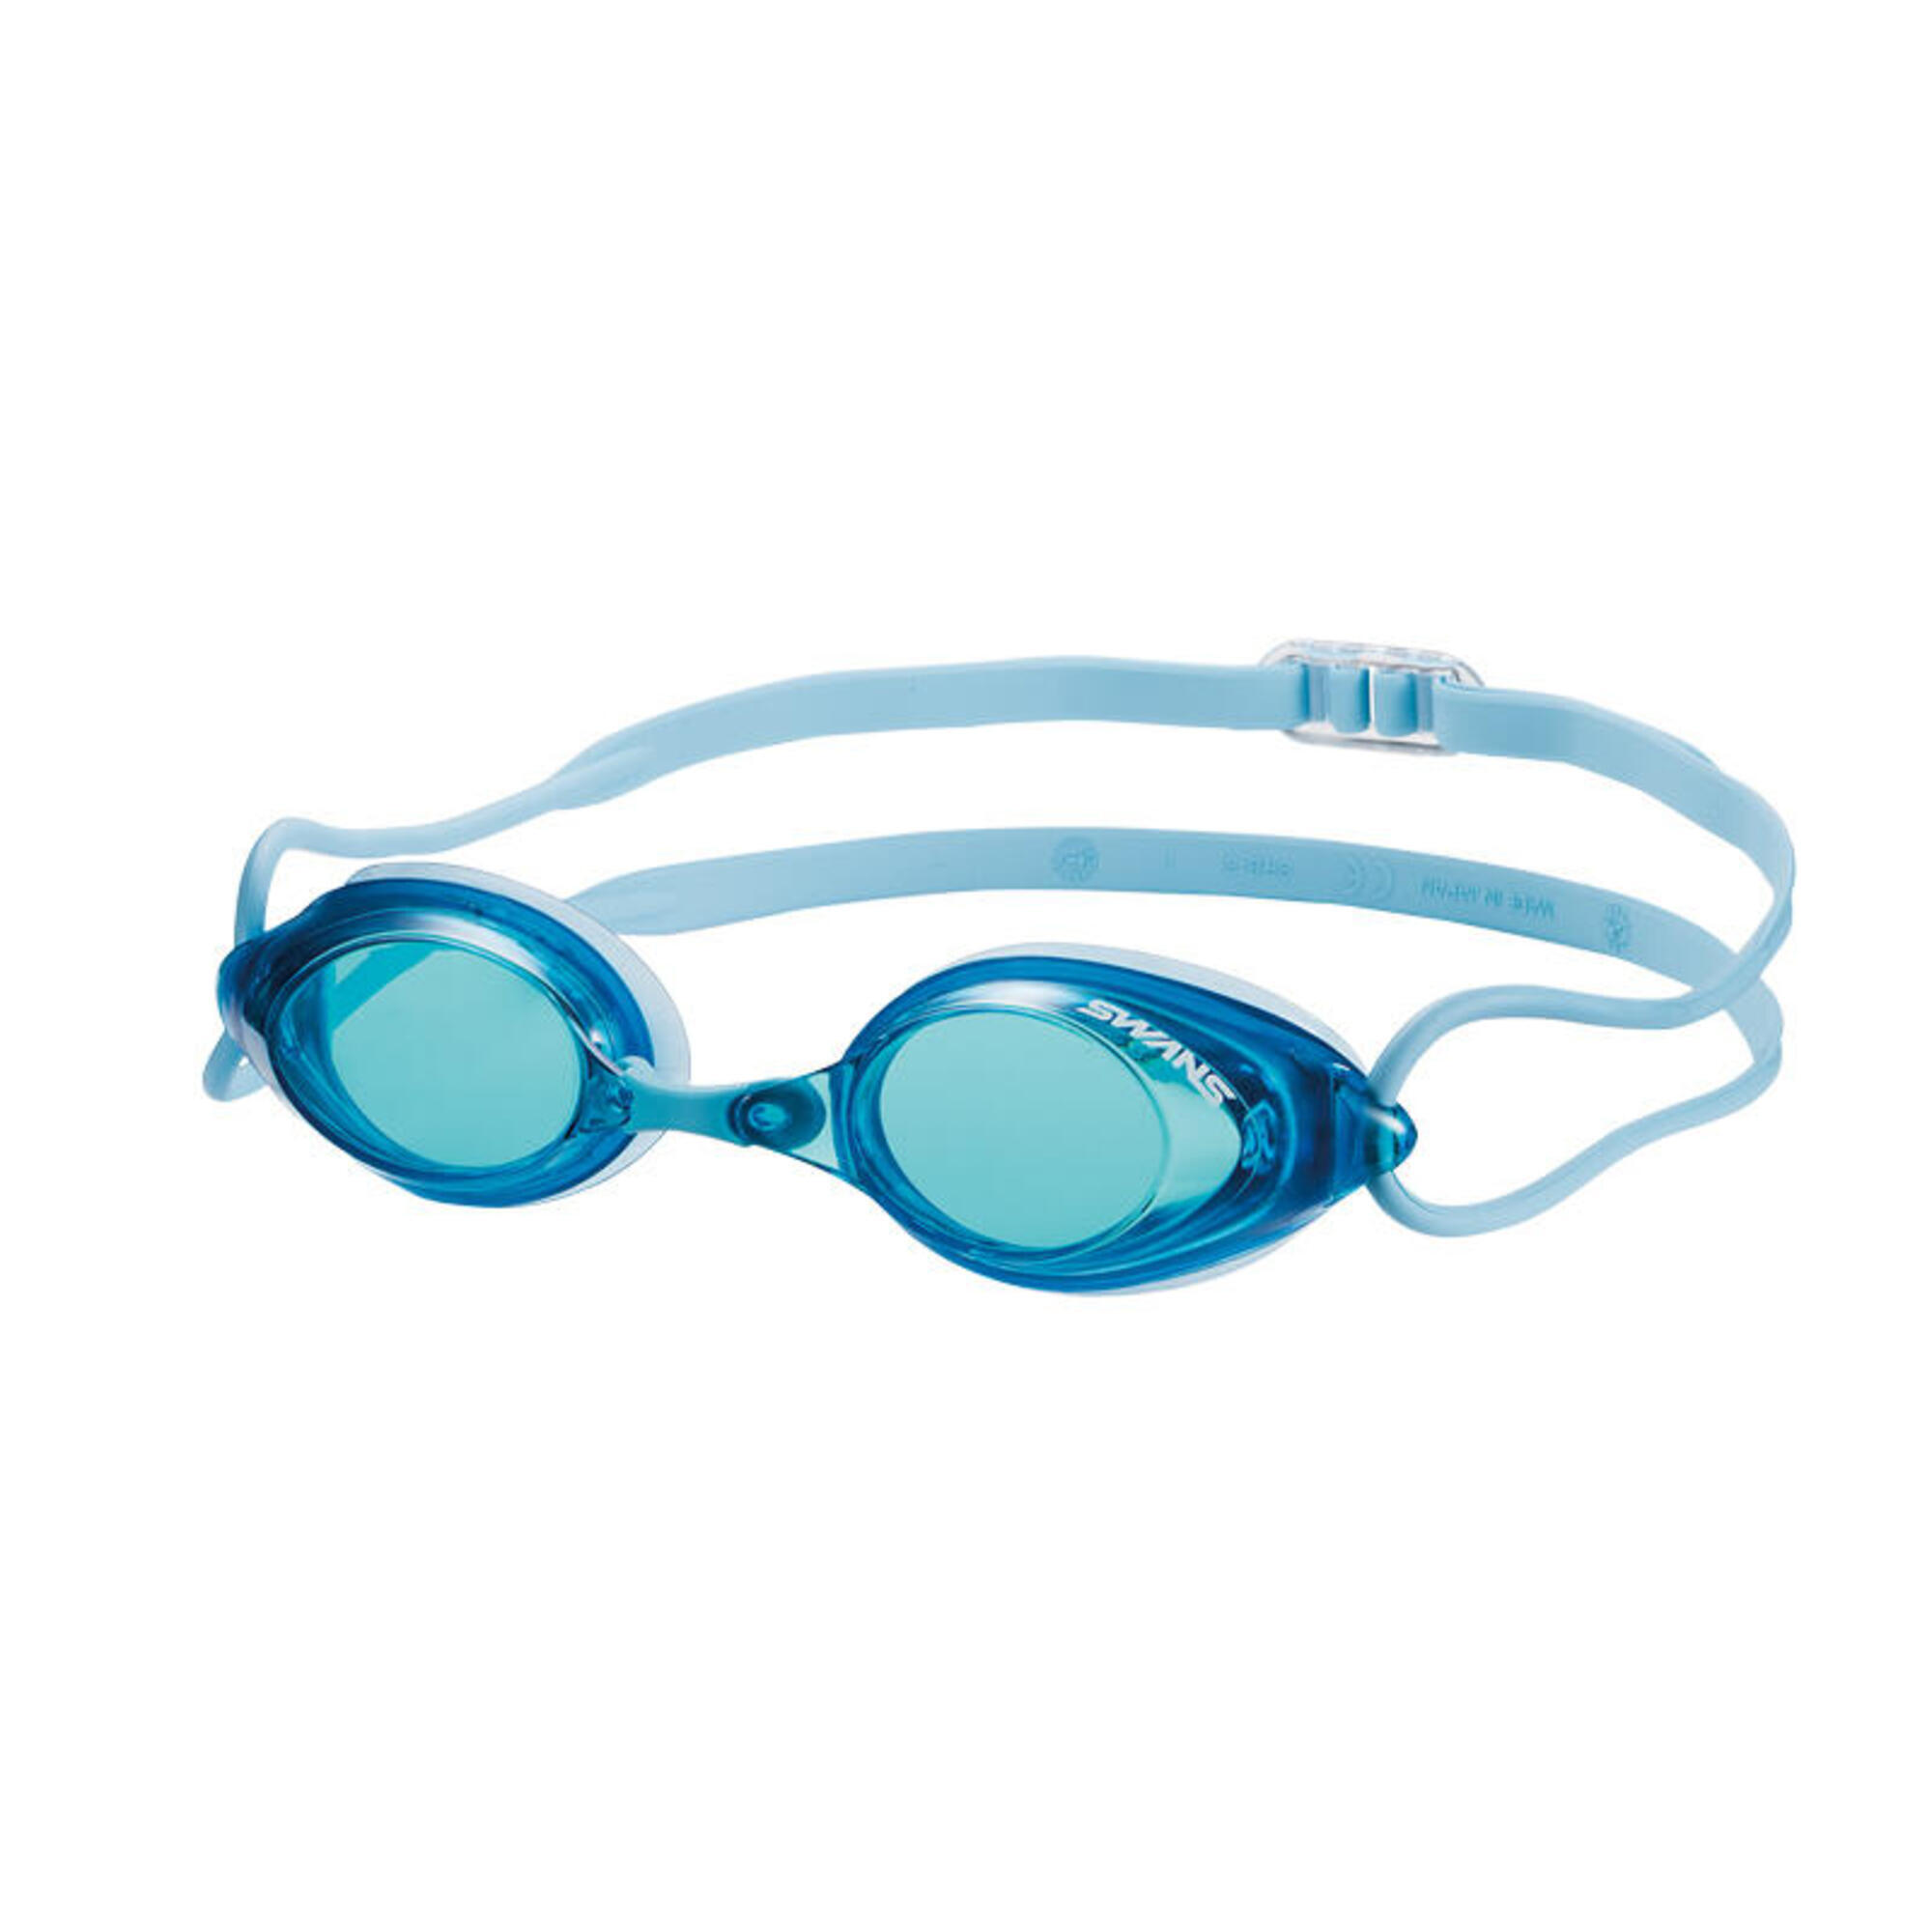 [SWN-SRXN] Competition Swimming Goggles - Sky Blue